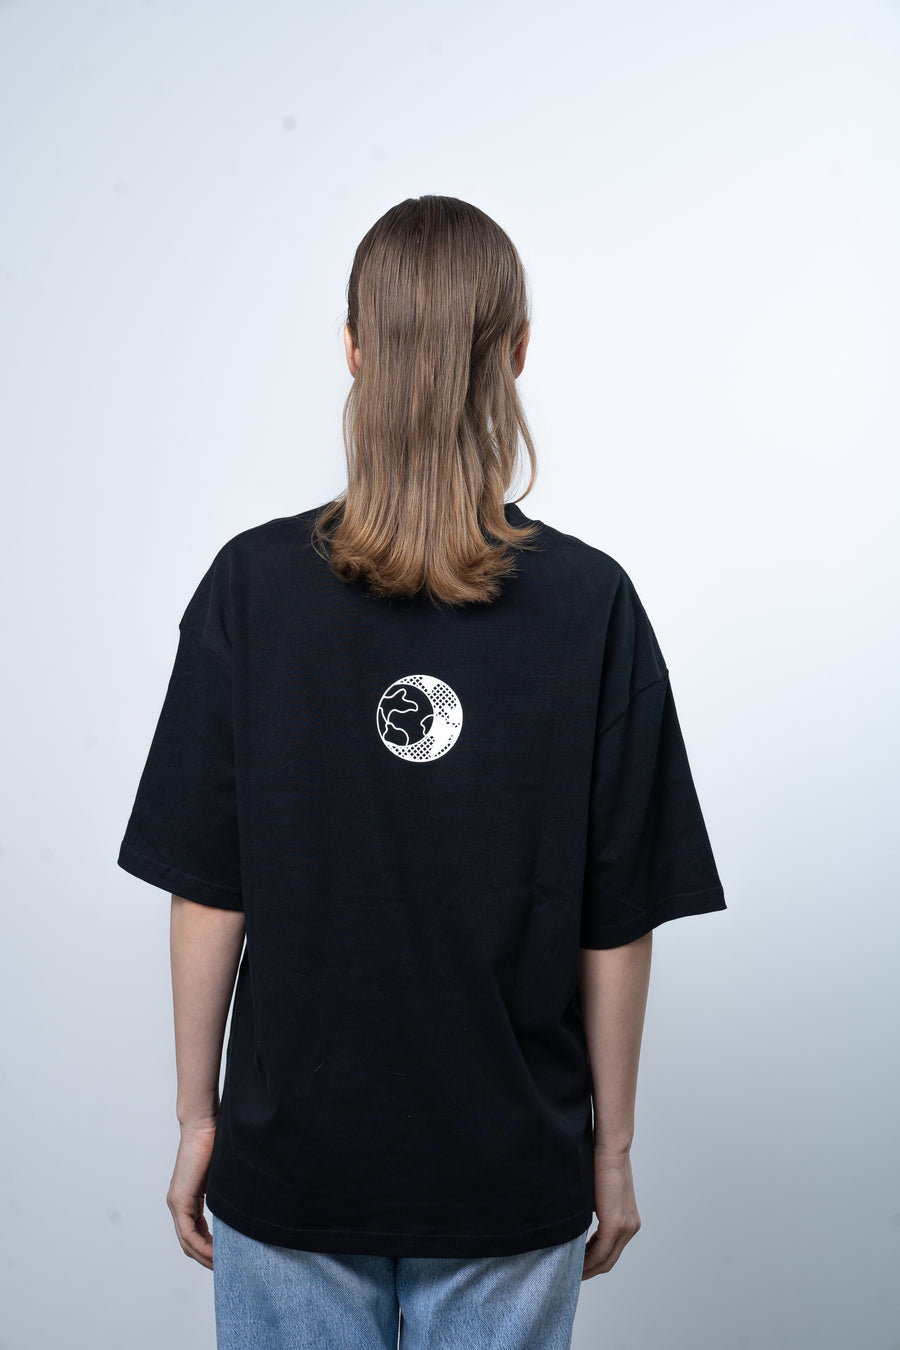 THE EARTH T-SHIRT